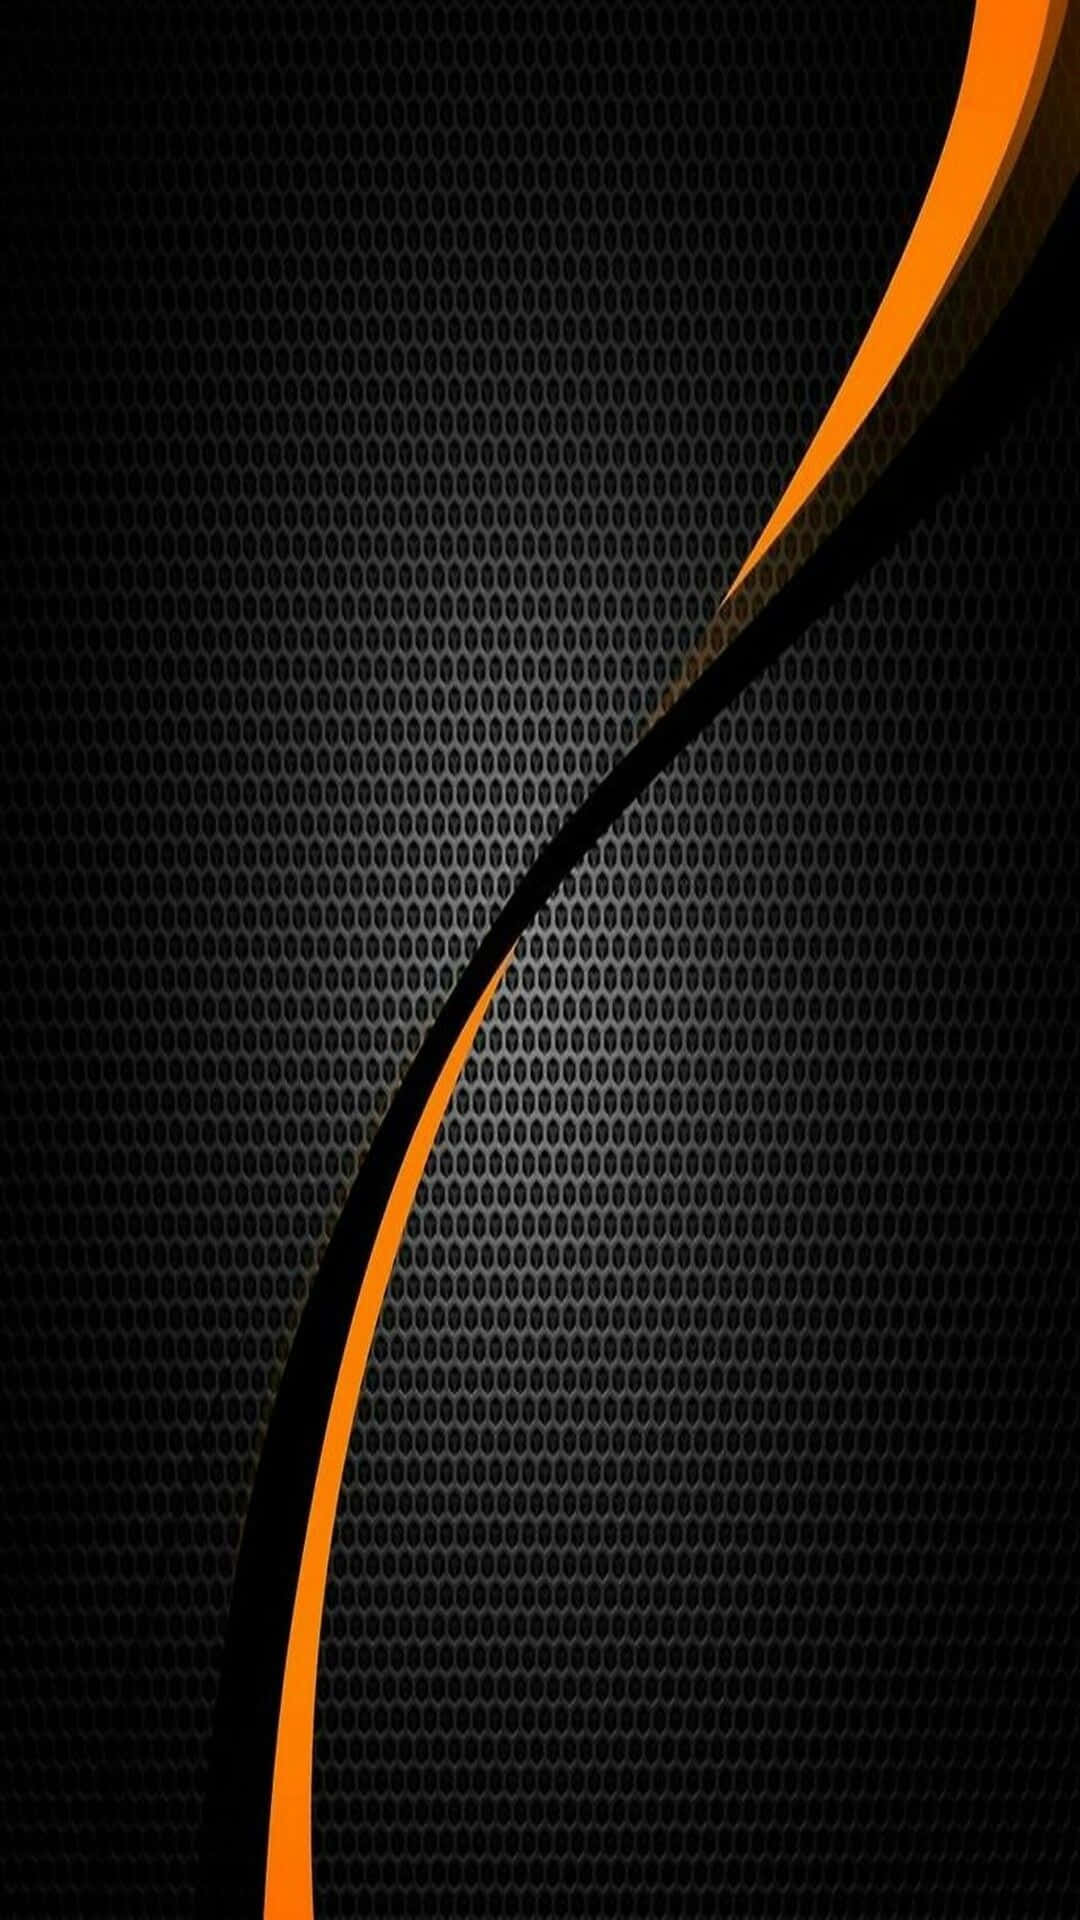 Customize your phone with our special carbon fiber iPhone case Wallpaper